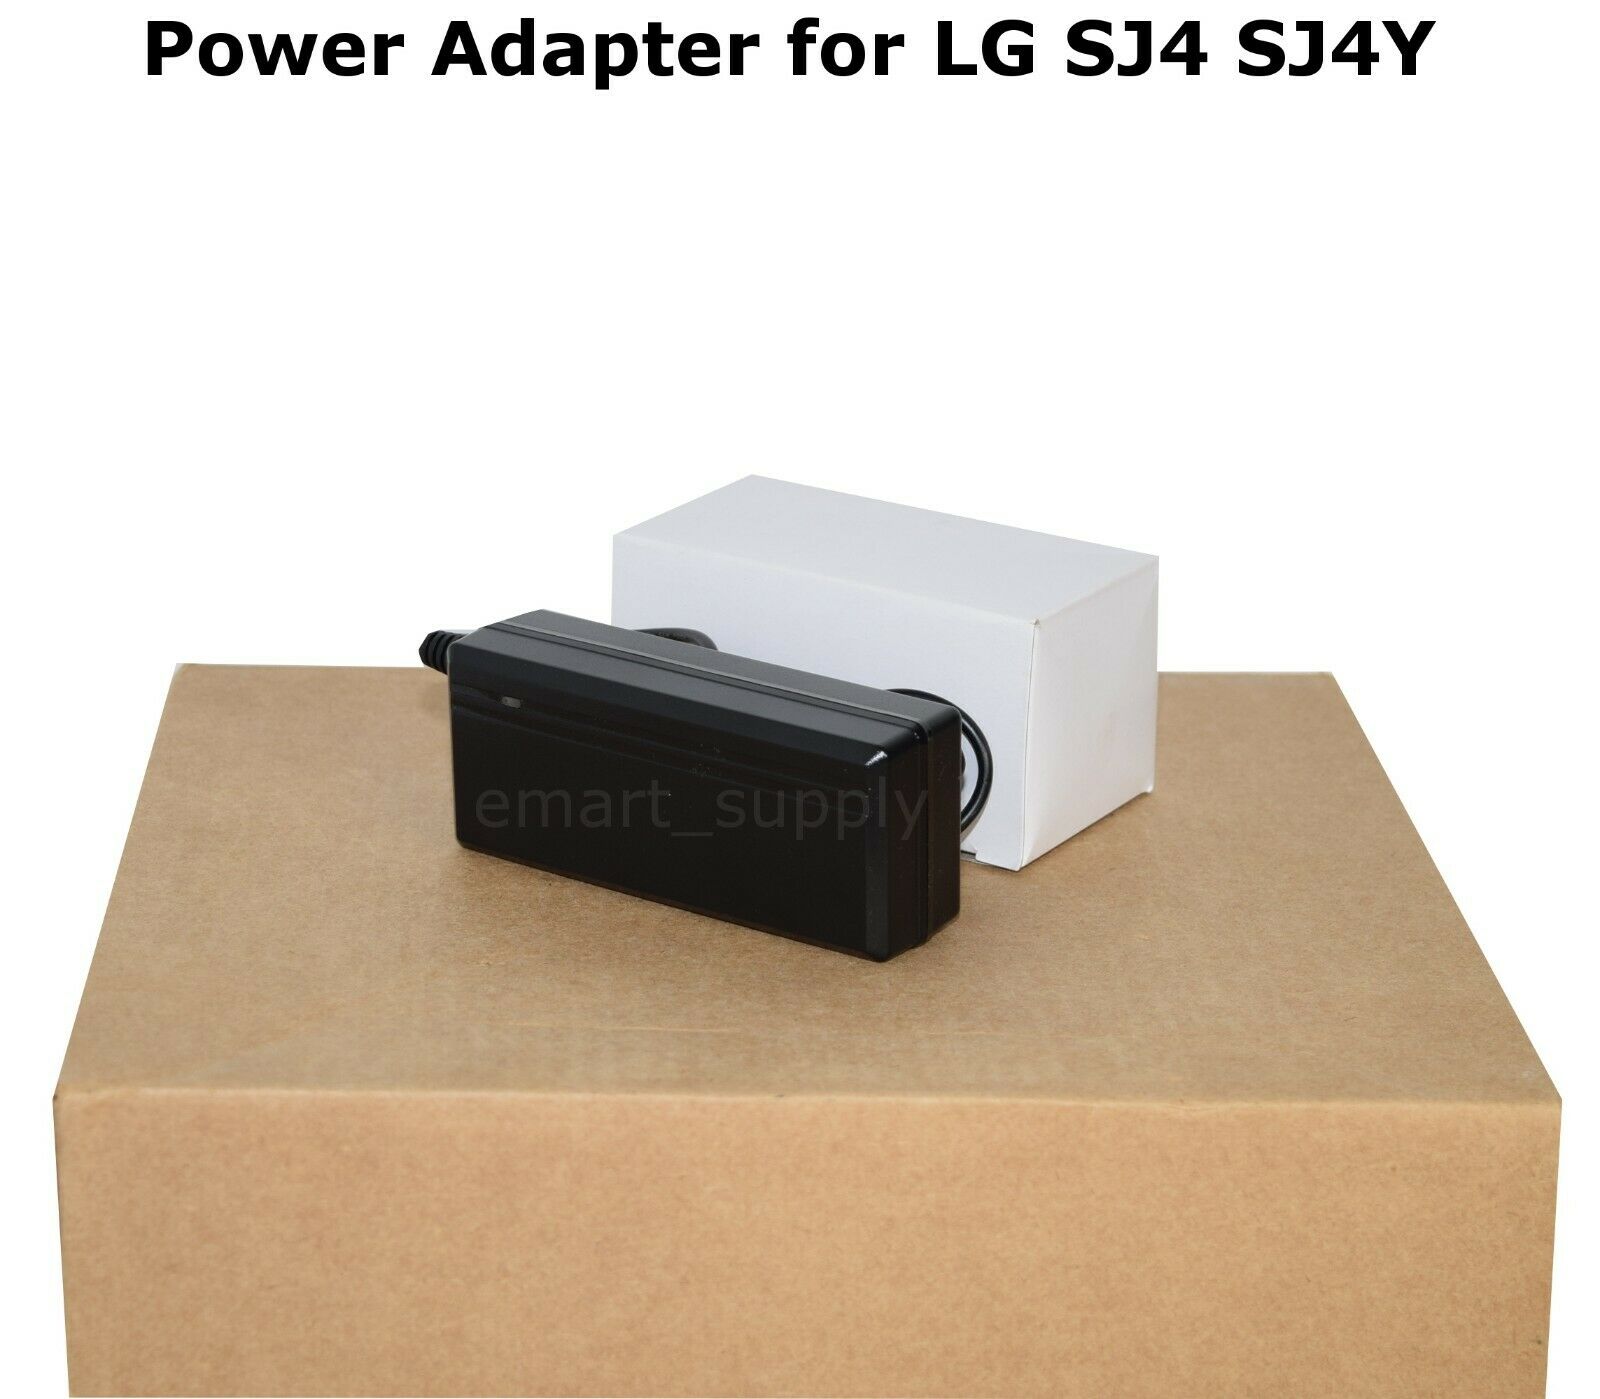 Adapter for LG SJ4 SJ4Y Wireless SoundBar Power Supply Charger Compatible Brand: For LG Type: Adapter Features: